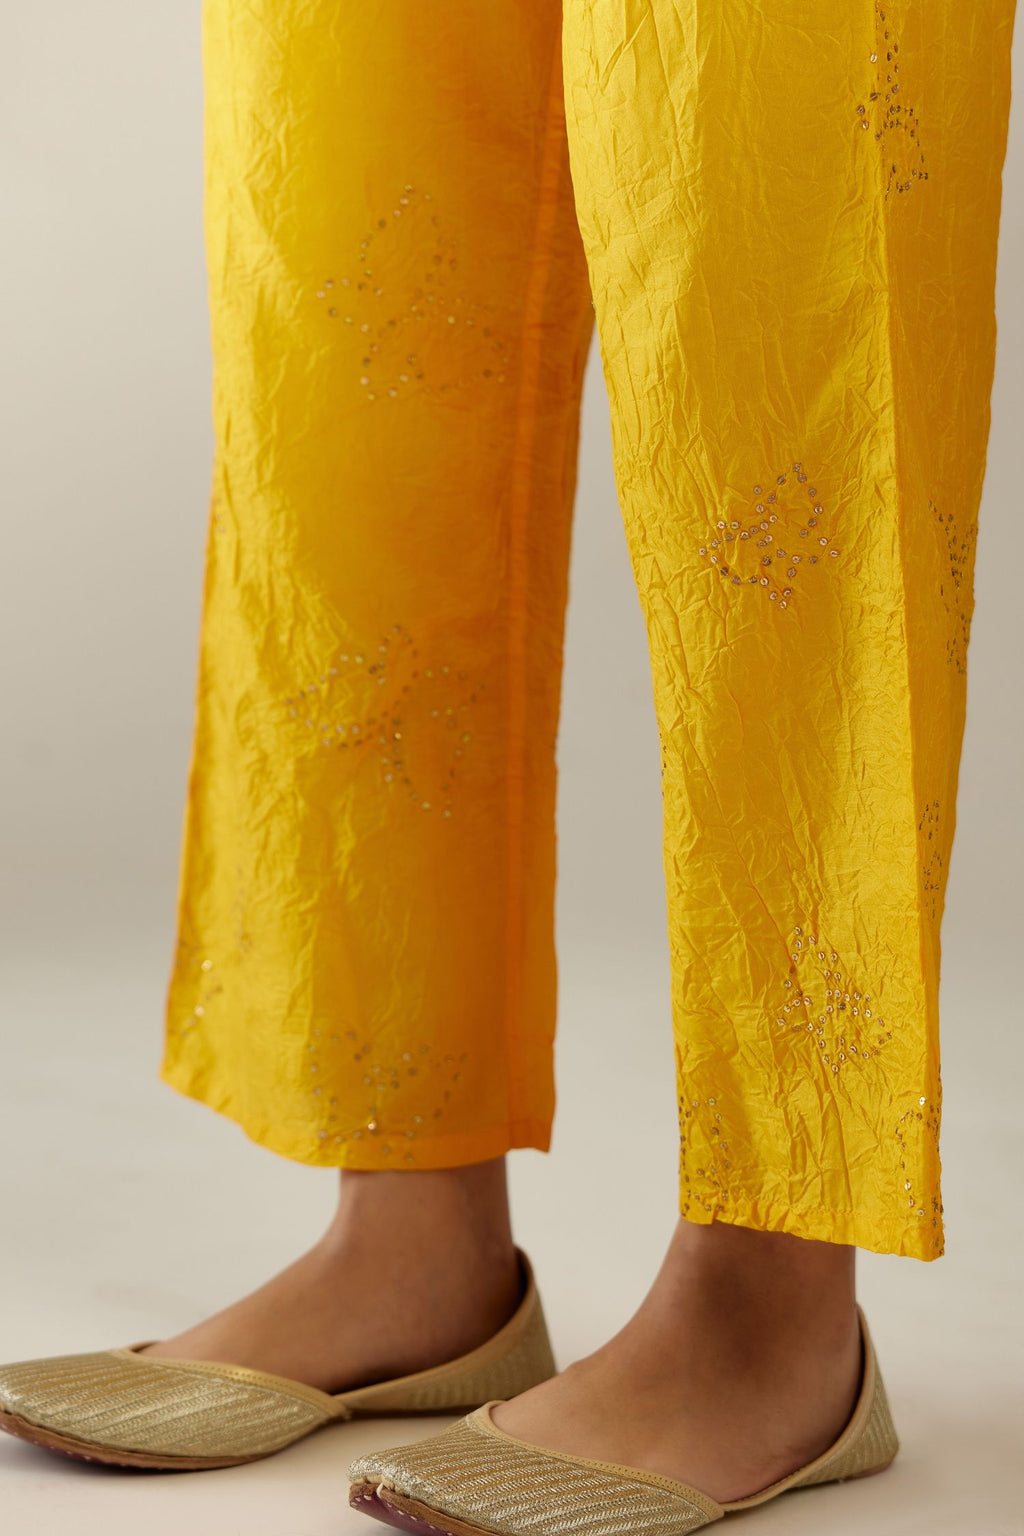 Deep yellow crushed silk pants with side pockets and assorted sequined butterflies till mid-calf length.